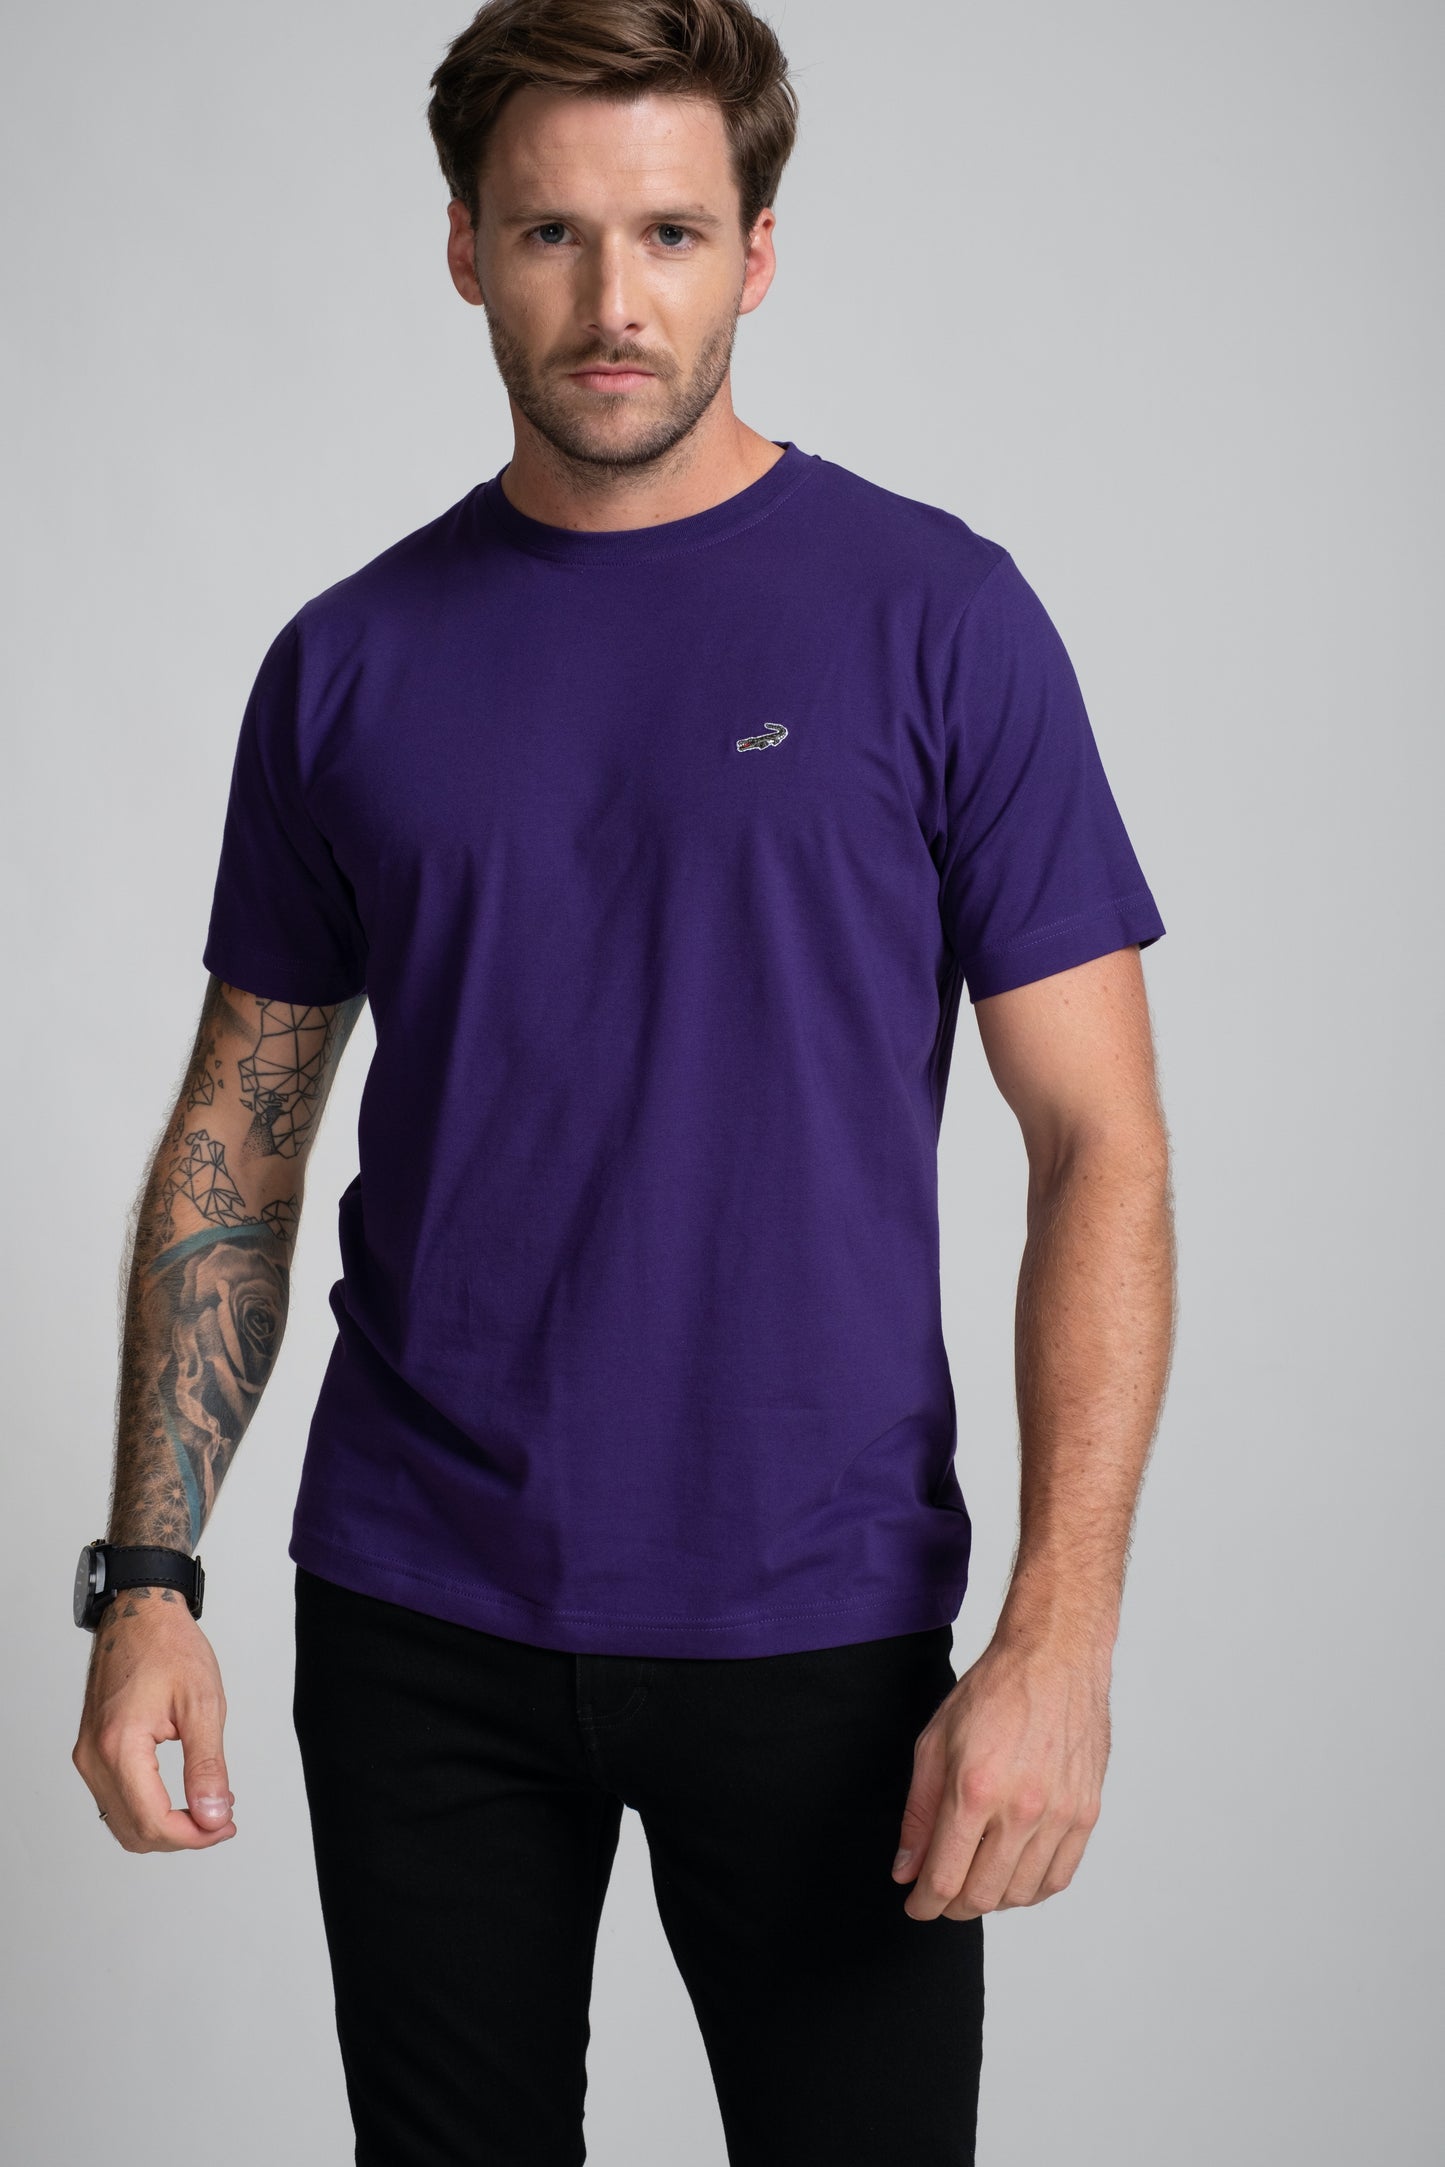 Classic Fit Short sleeves-CasualCrew Neck - Grape Royal